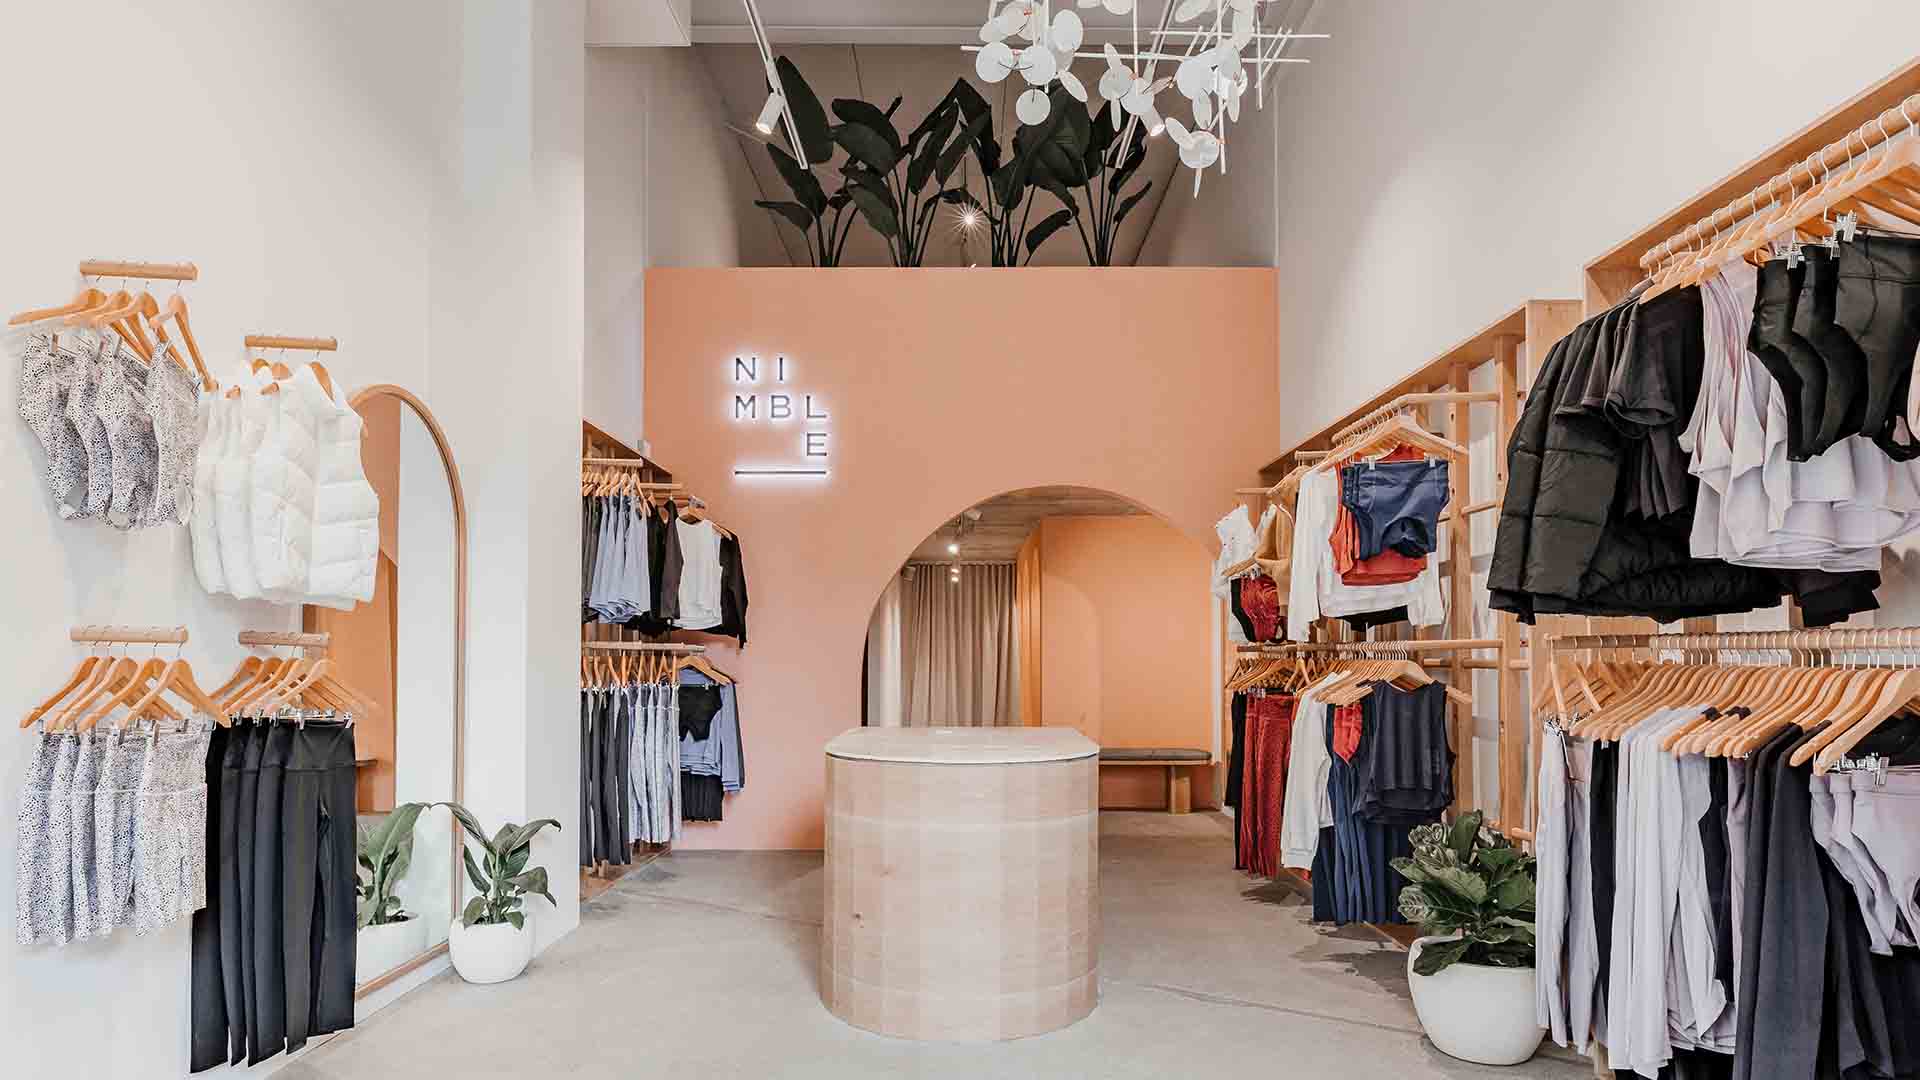 Sustainable Activewear Brand Nimble Has Opened Its First Queensland Store on James Street